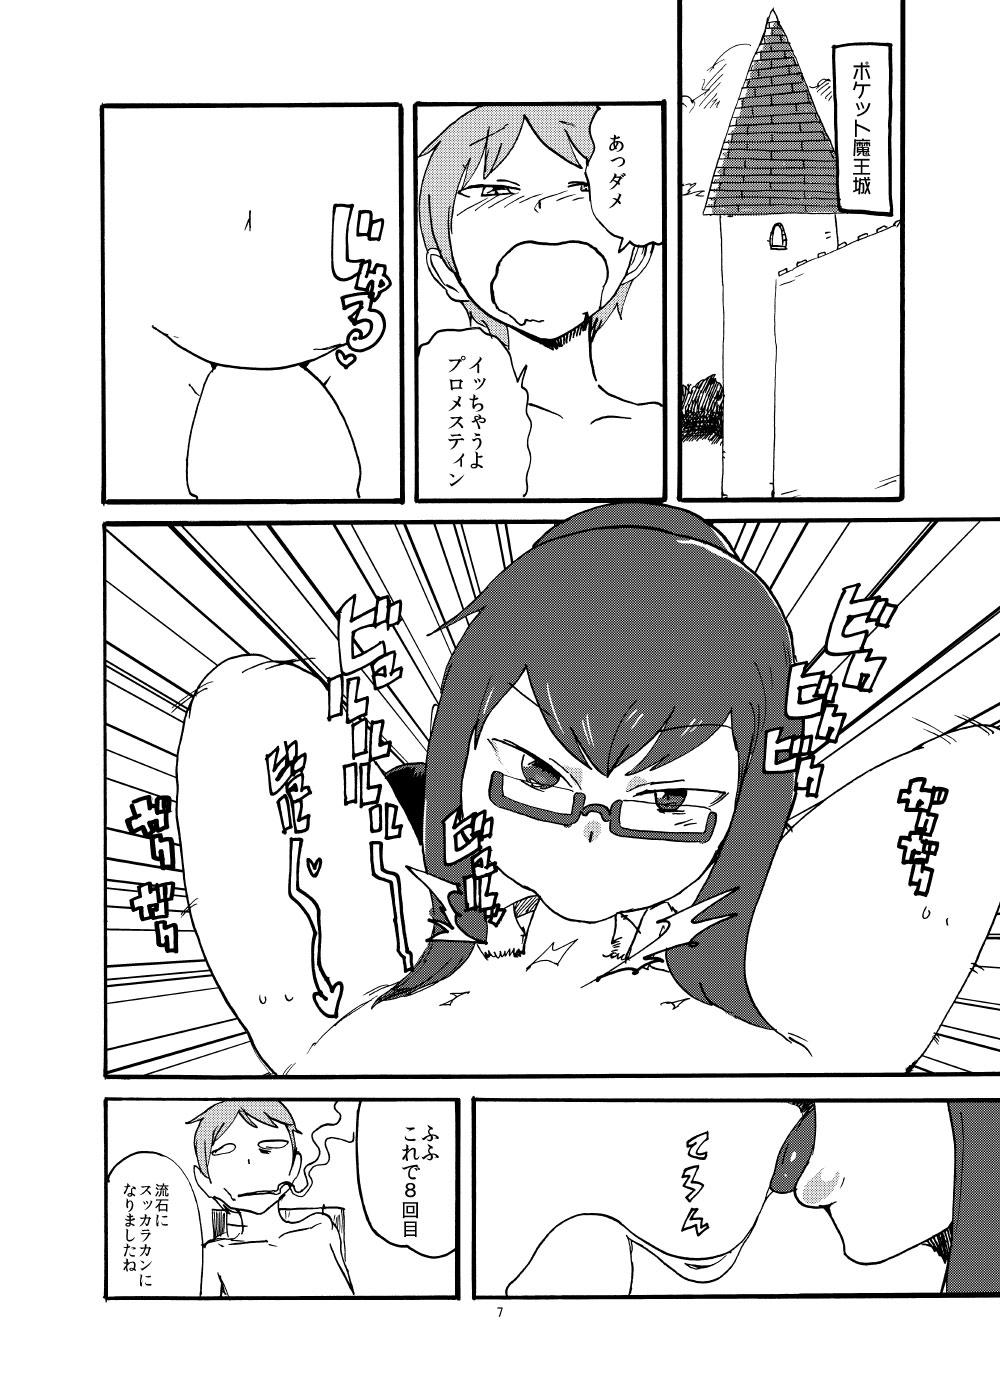 This Haru no MonQue Hon - Monster girl quest Eurobabe - Page 6